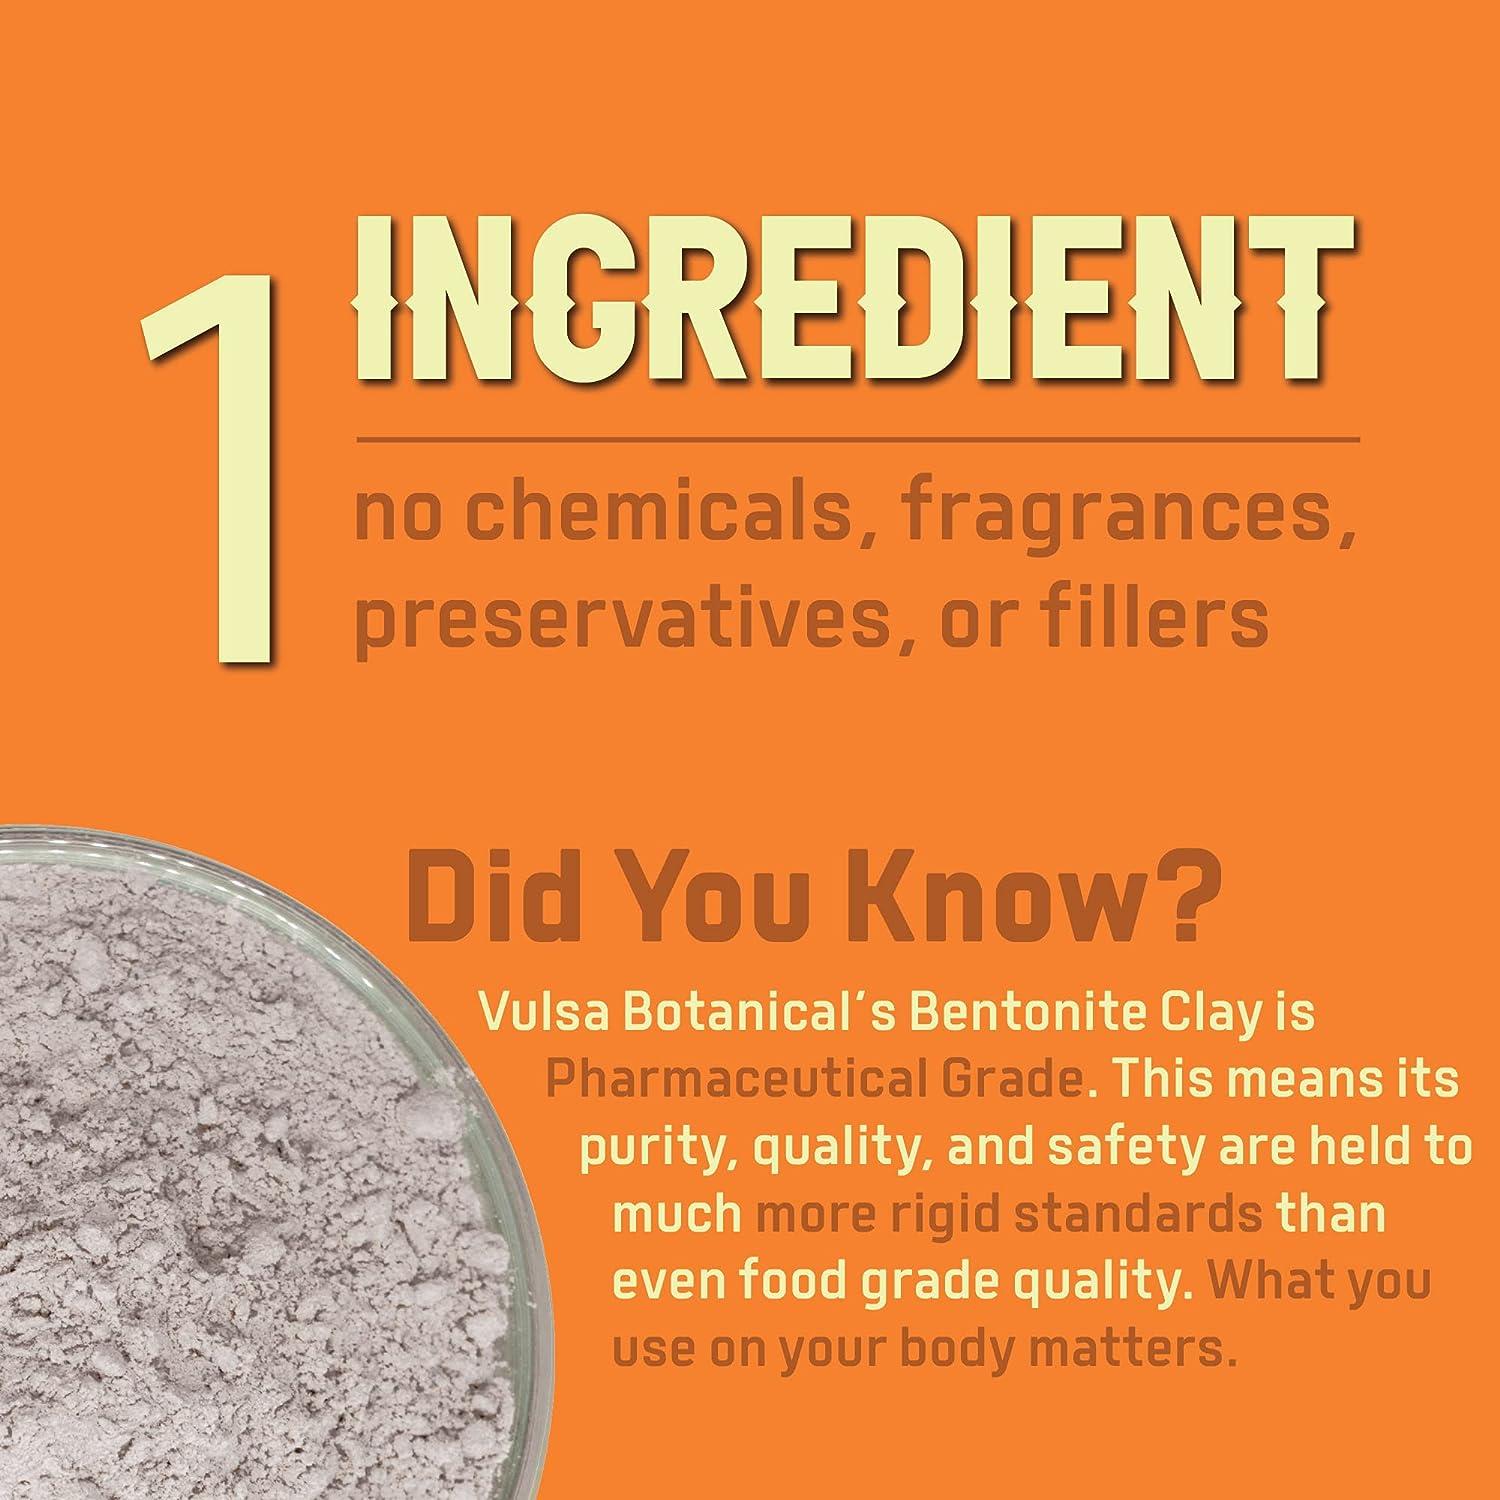 What Is Bentonite Clay & Why Is It So Effective In Treating Acne